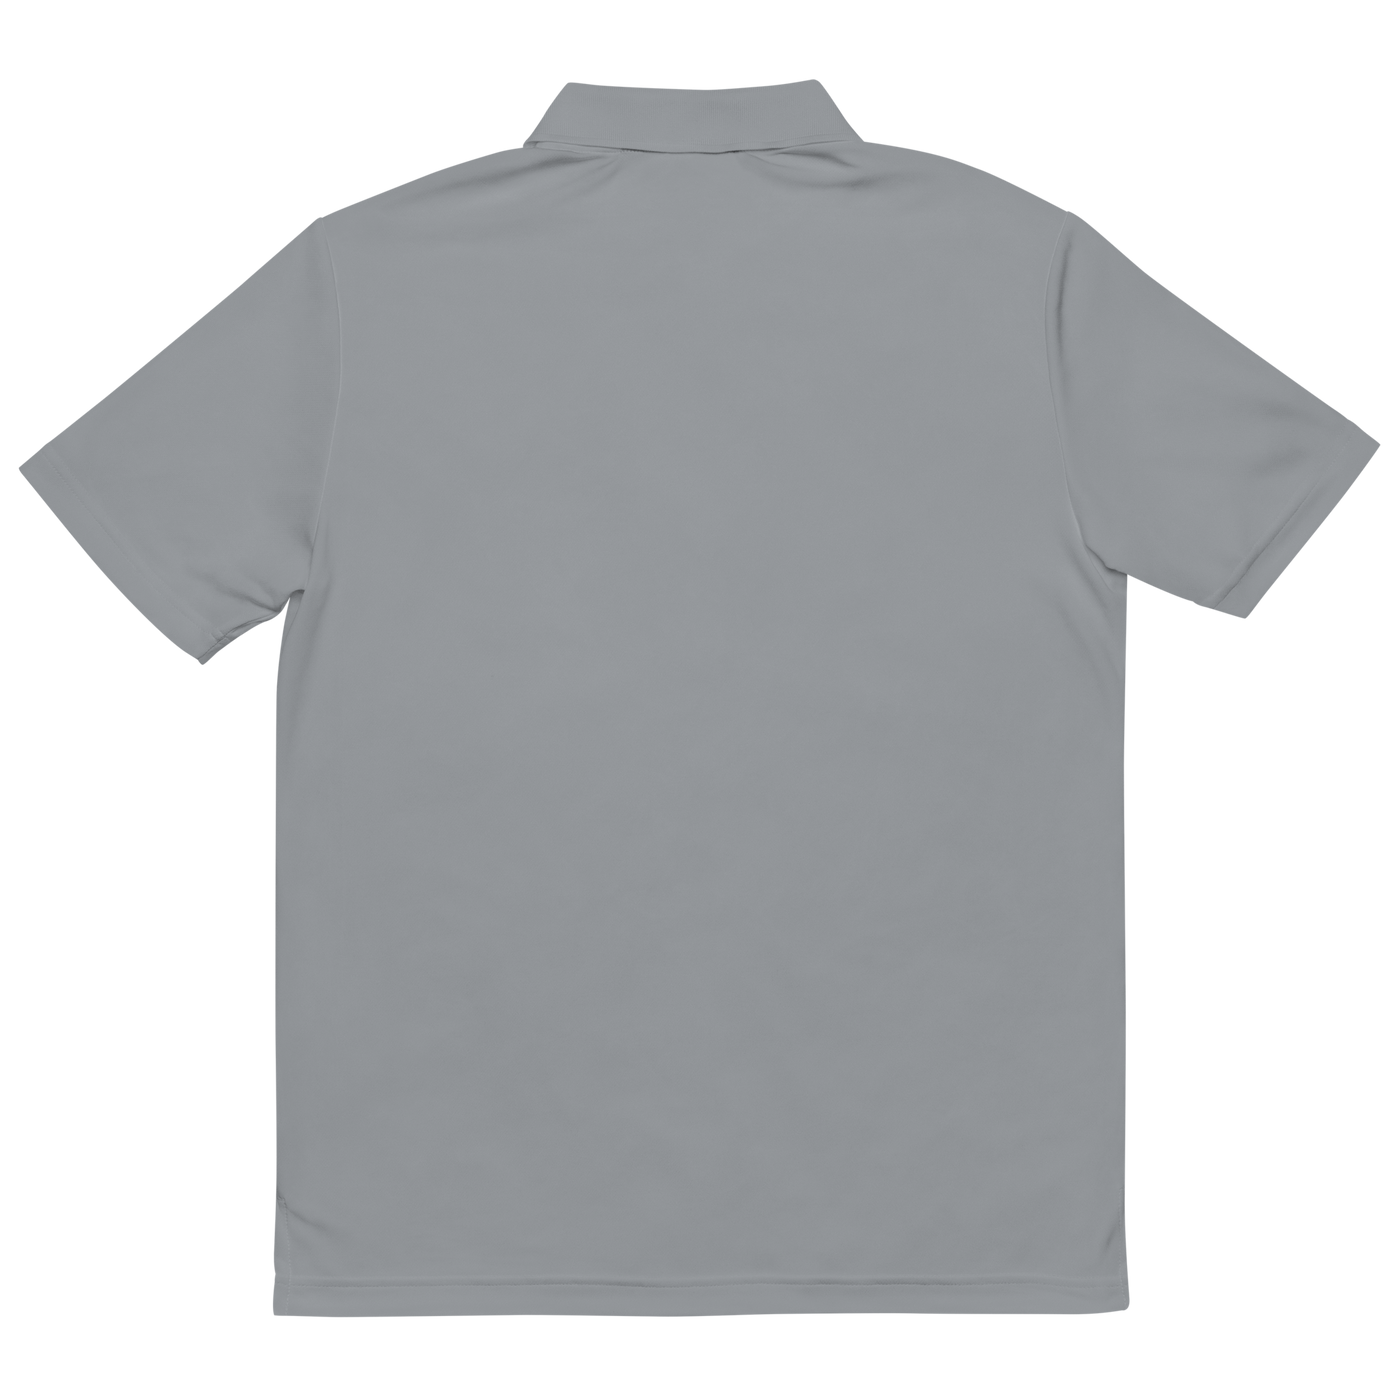 Adidas Performance Embroidered Gray Polo Shirt - Focus On Your Goals